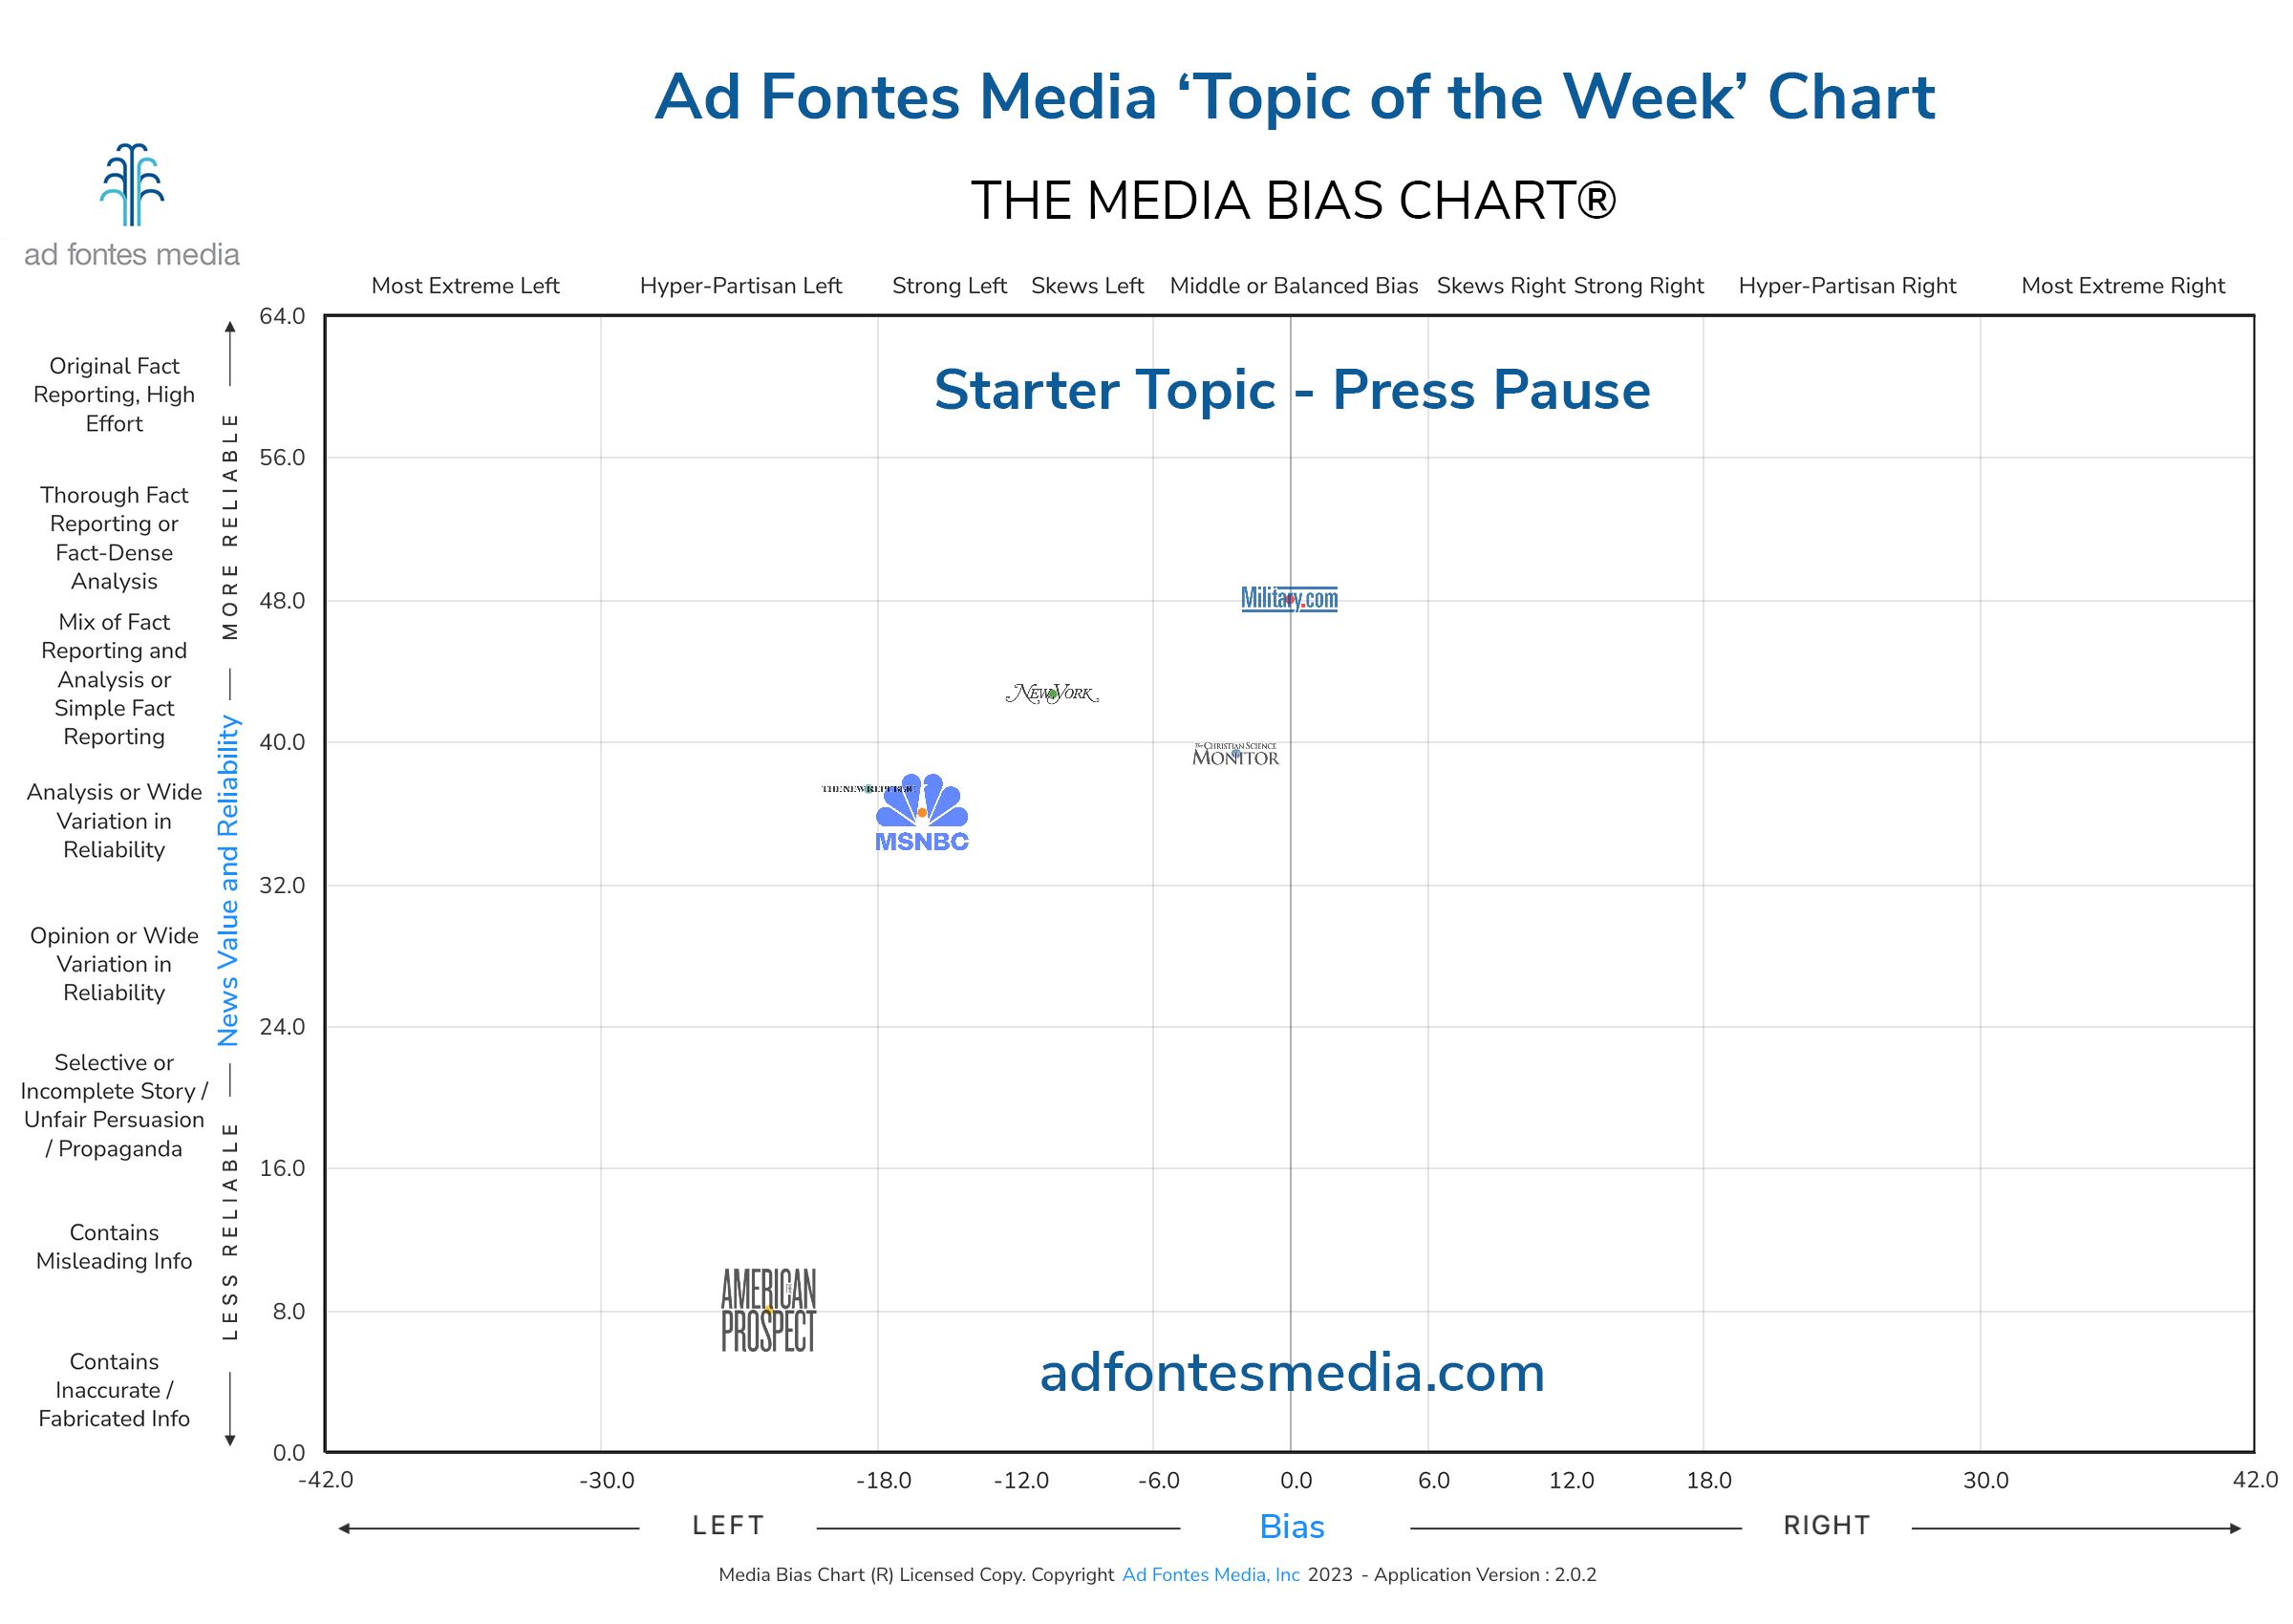 Media Bias Chart Explores News Coverage of Biden’s Response to the Israel-Hamas Conflict